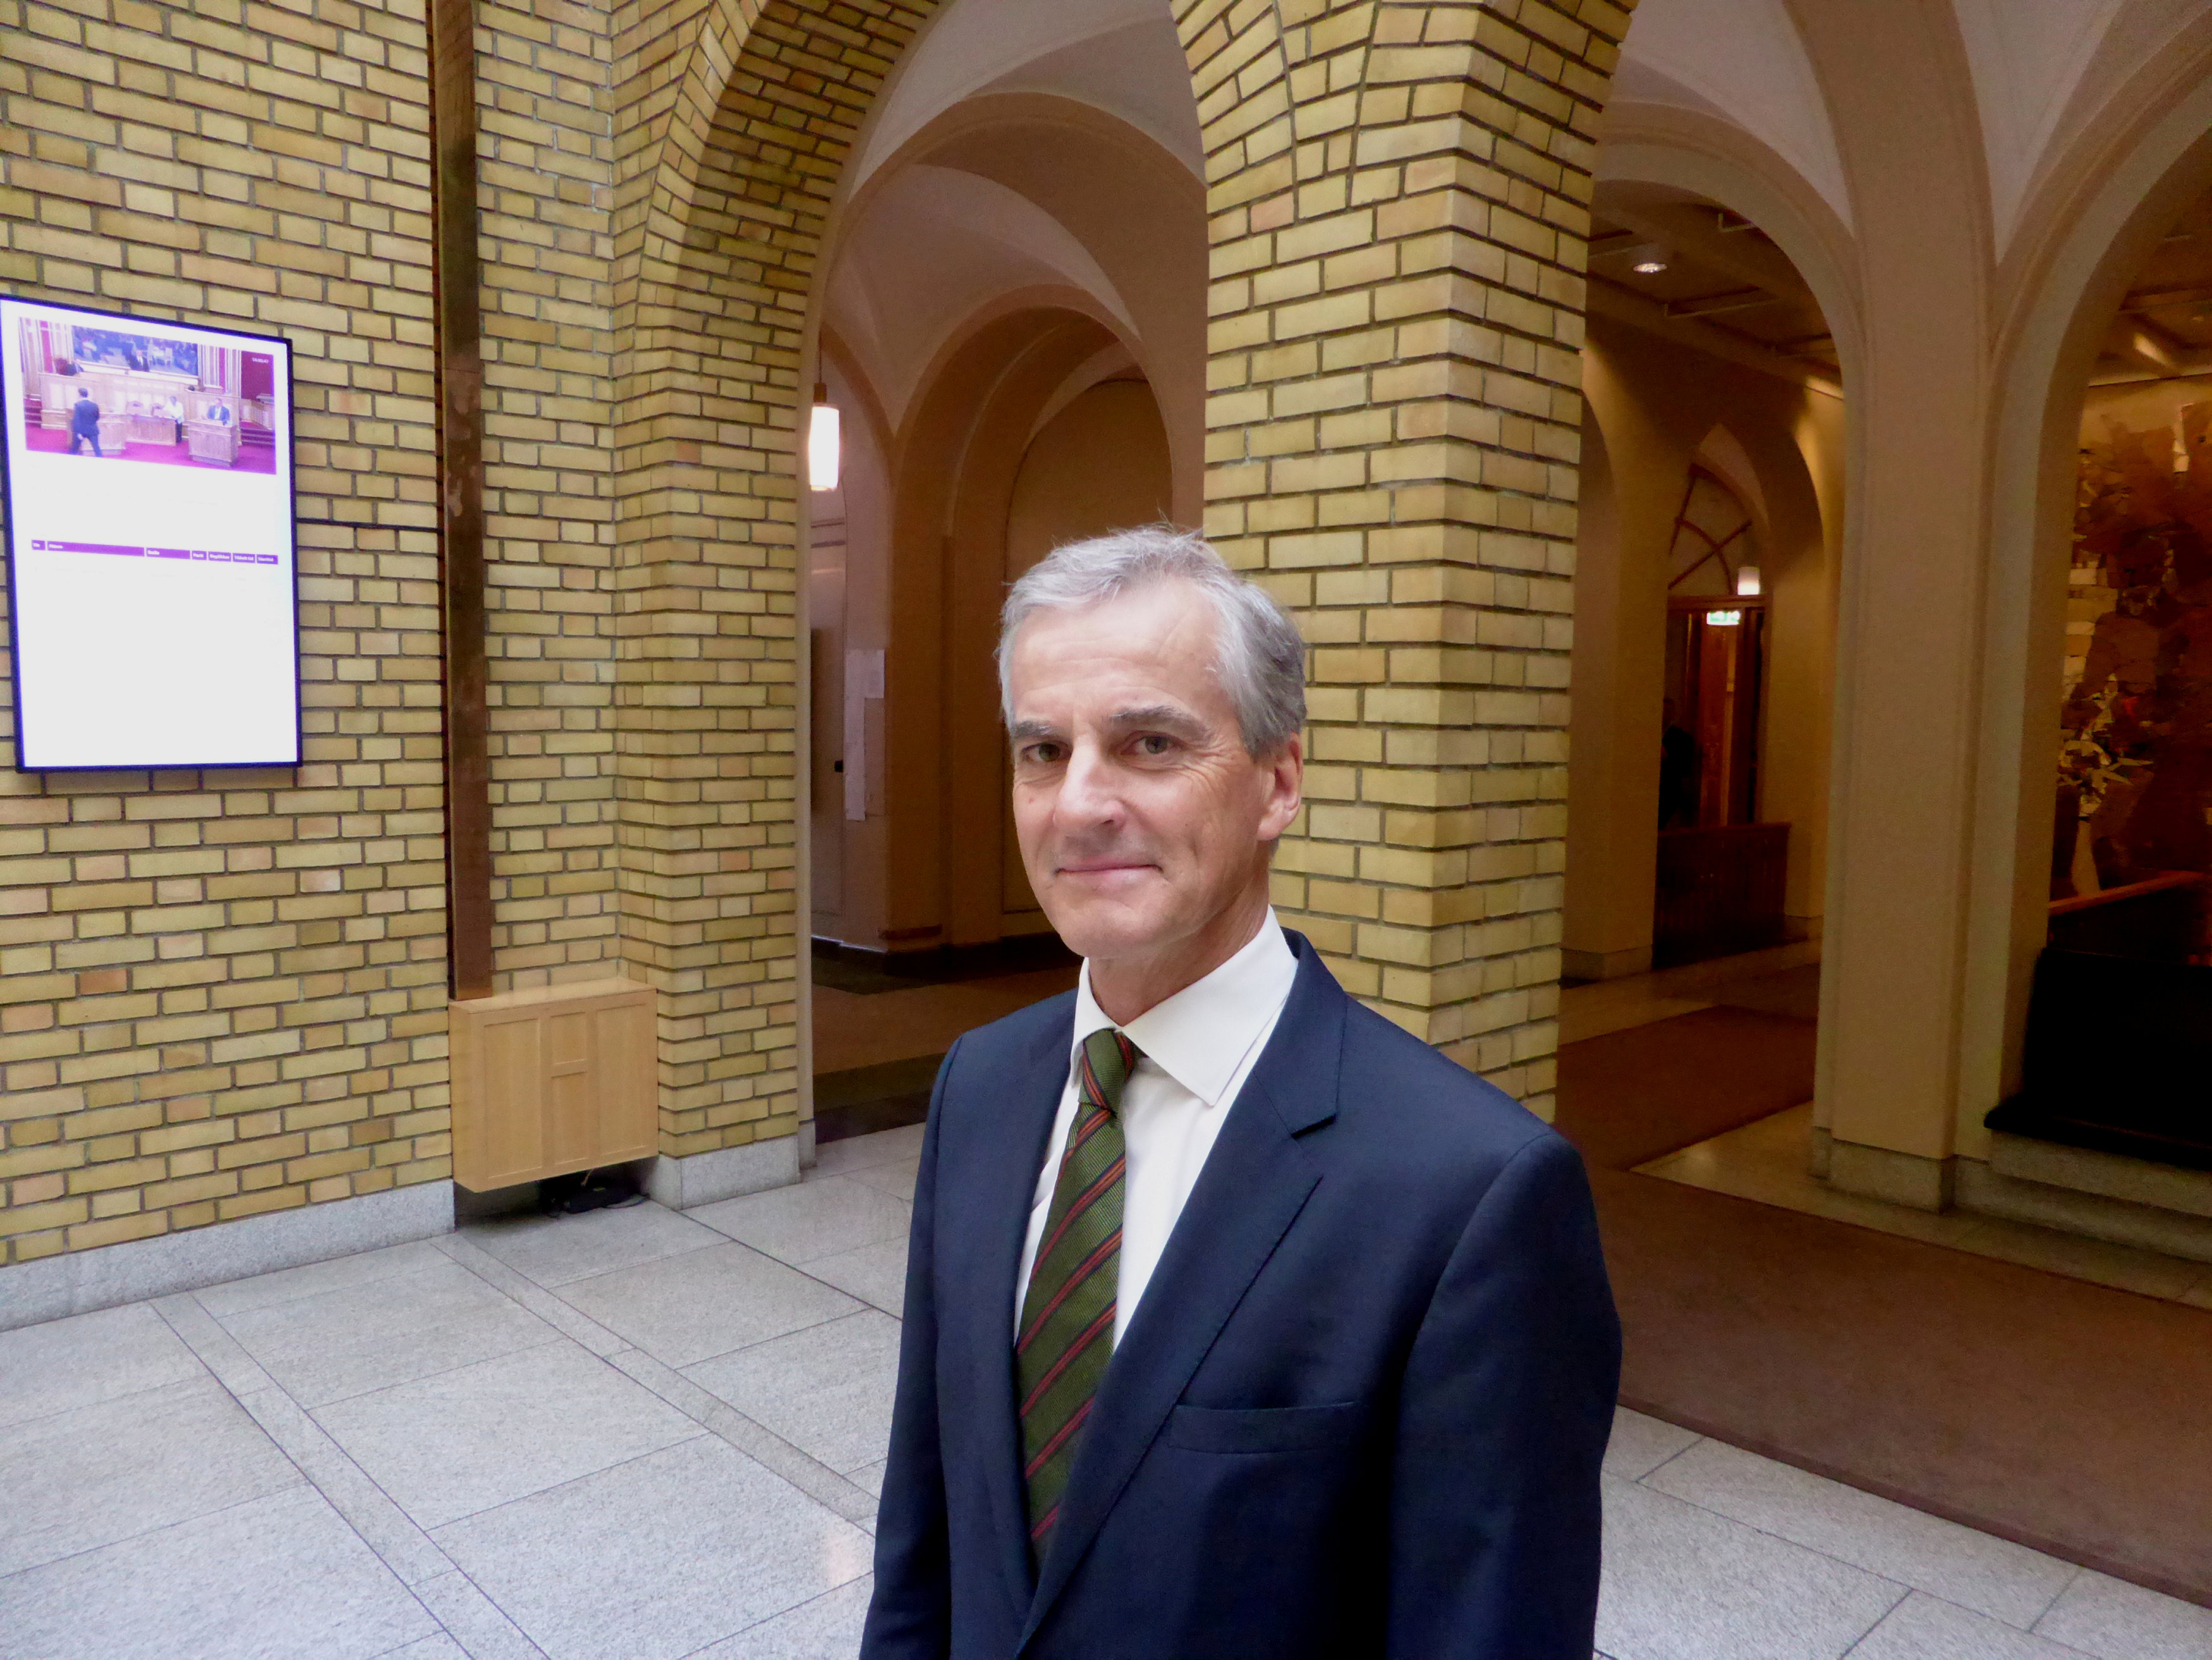 Leader of the Norway's opposition Labour party Jonas Gahr Stoere poses for a picture in parliament in Oslo, Norway May 30, 2017. (Gwladys Fouche / Reuters File Photo)